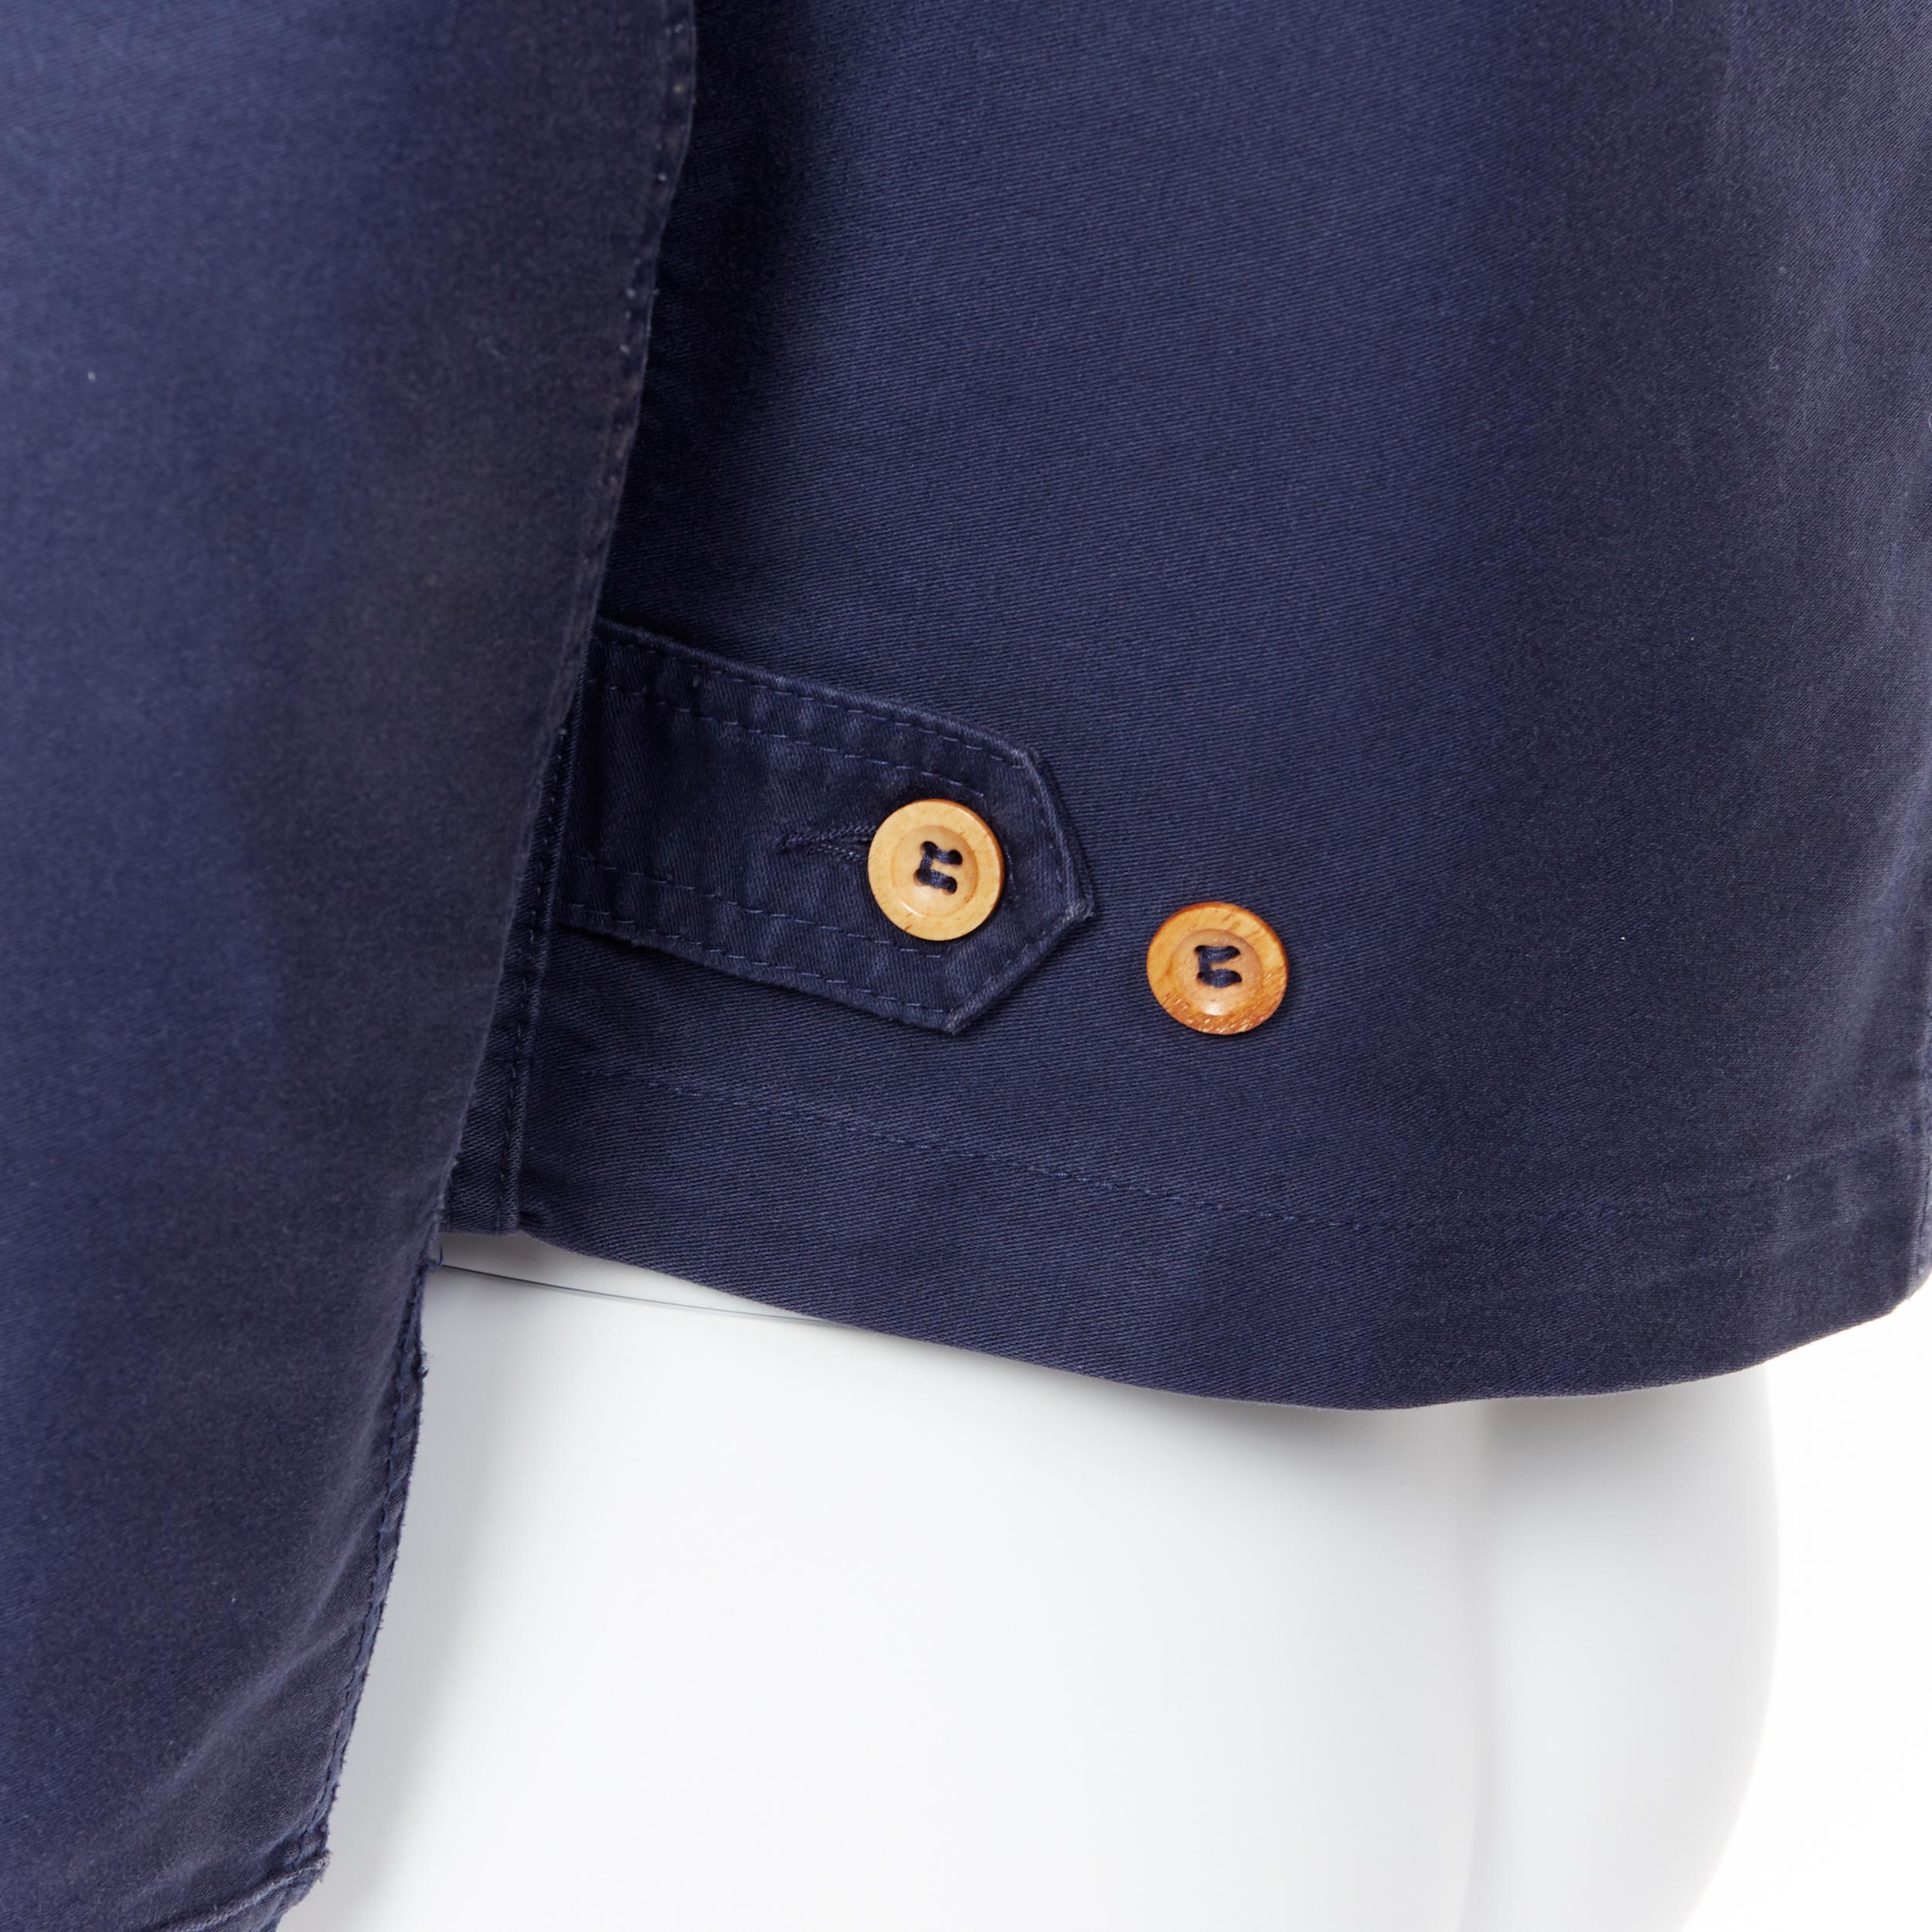 COMME DES GARCONS SHIRT navy blue washed cotton zip front worker jacket XS
Brand: Comme Des Garcons
Model Name / Style: Worker jacjet
Material: Cotton
Color: Navy
Pattern: Solid
Extra Detail: Long sleeve. Collared neckline. Spread collar.
Made in: